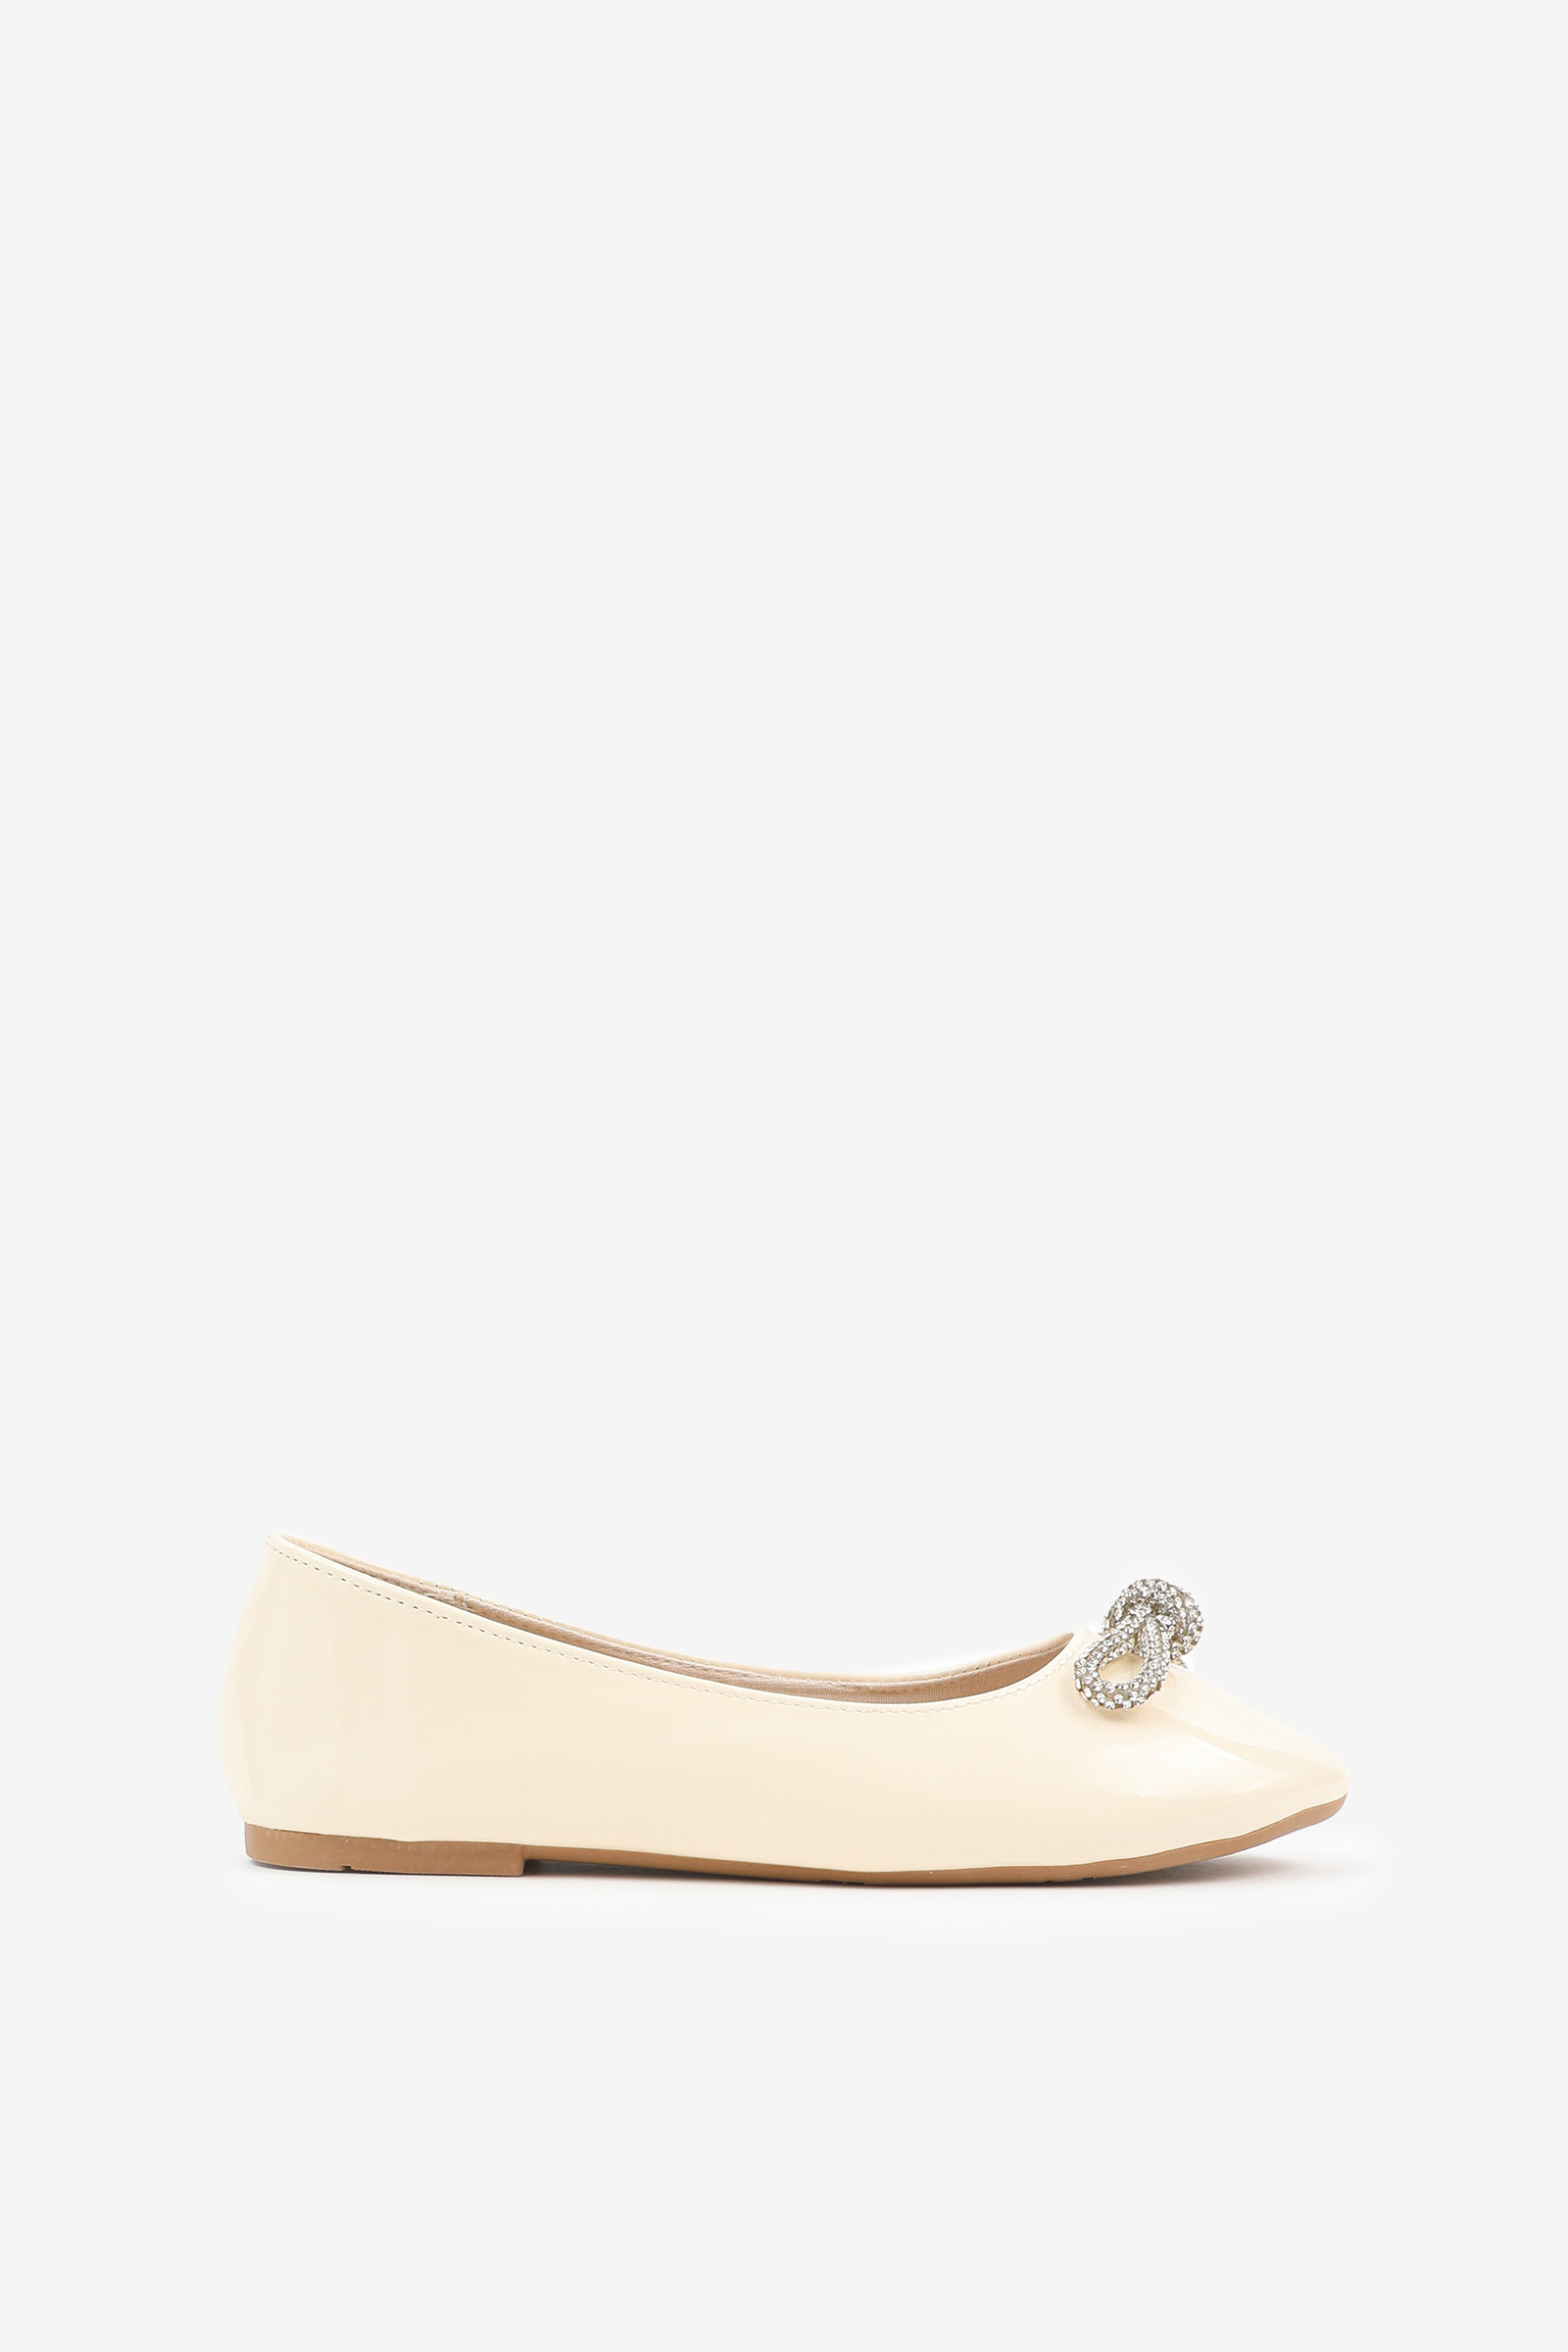 Ardene Ballet Flats with Rhinestone Bow Embellishment in Beige | Size | Faux Leather/Rubber